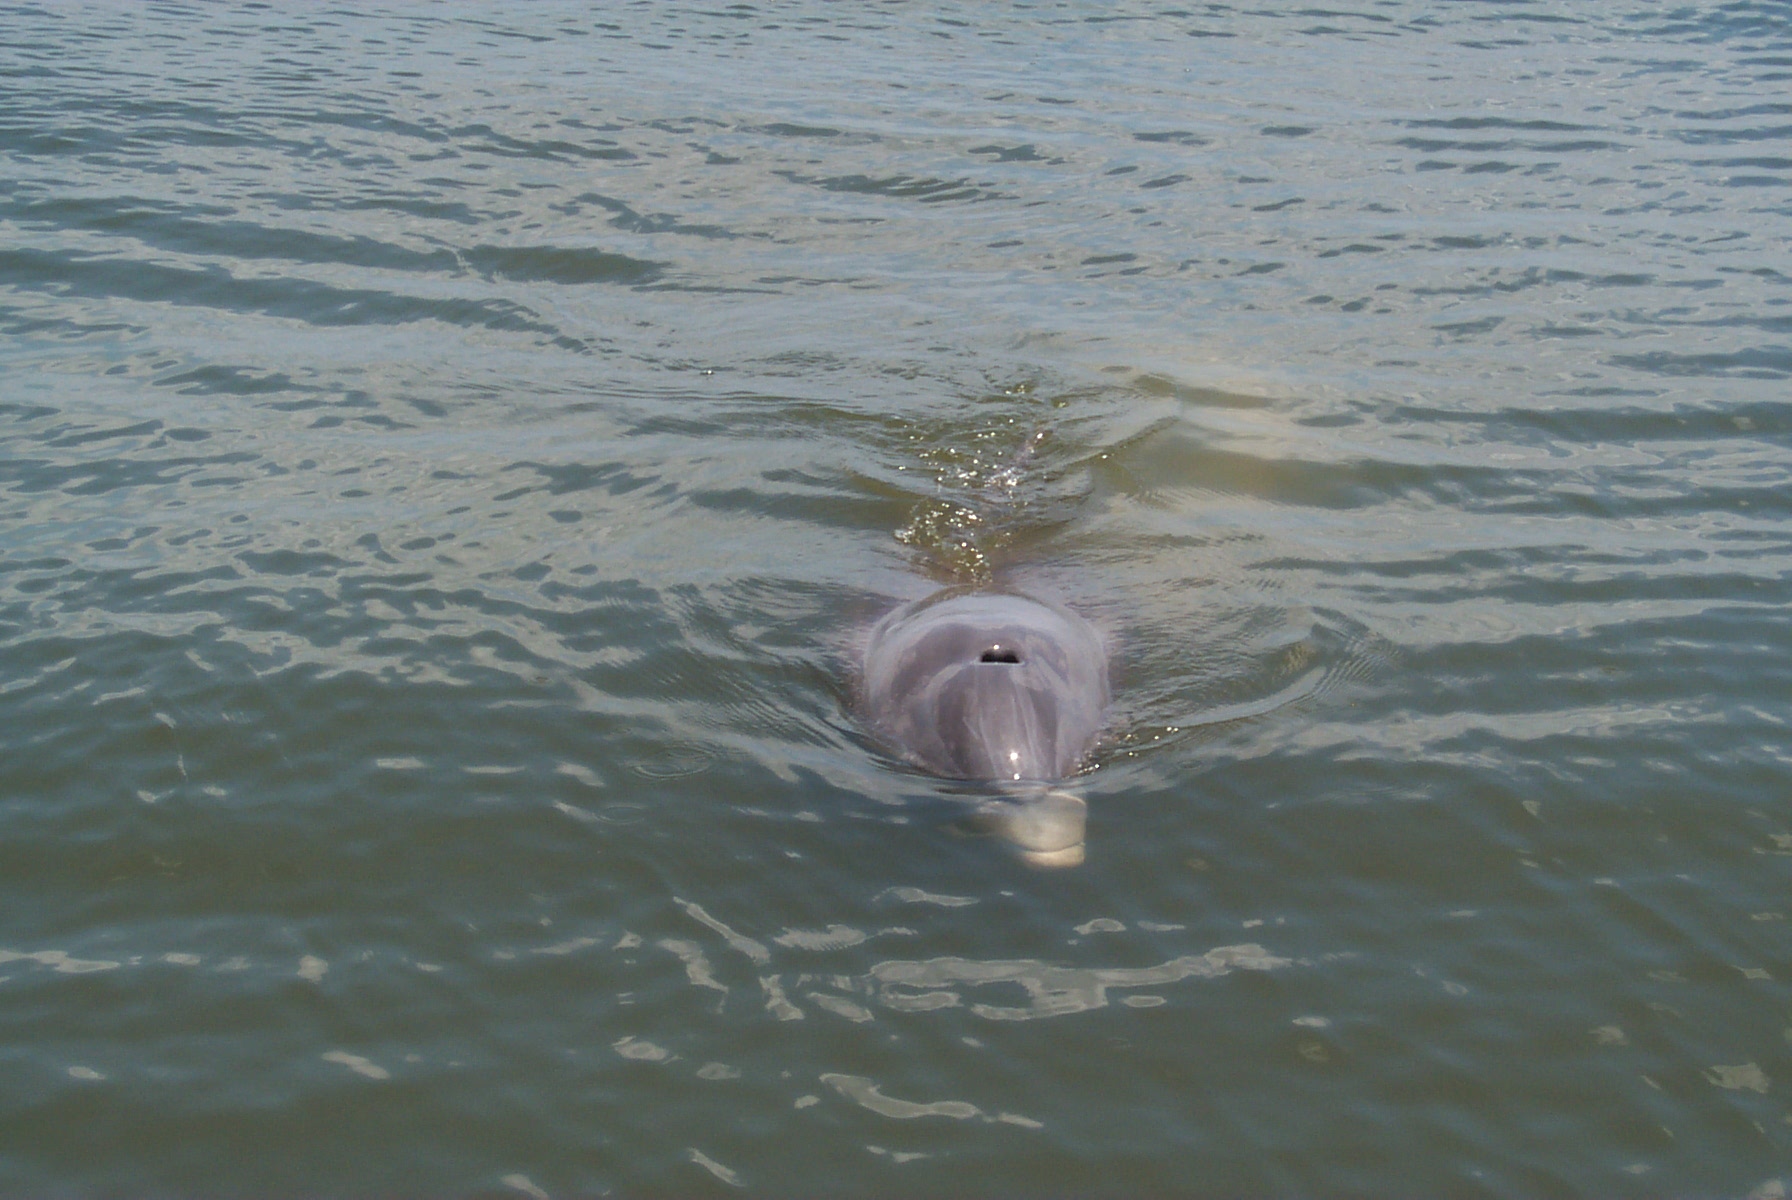 With its location on the Caloosahatchee River Shell Point attracts dolphins and manatees